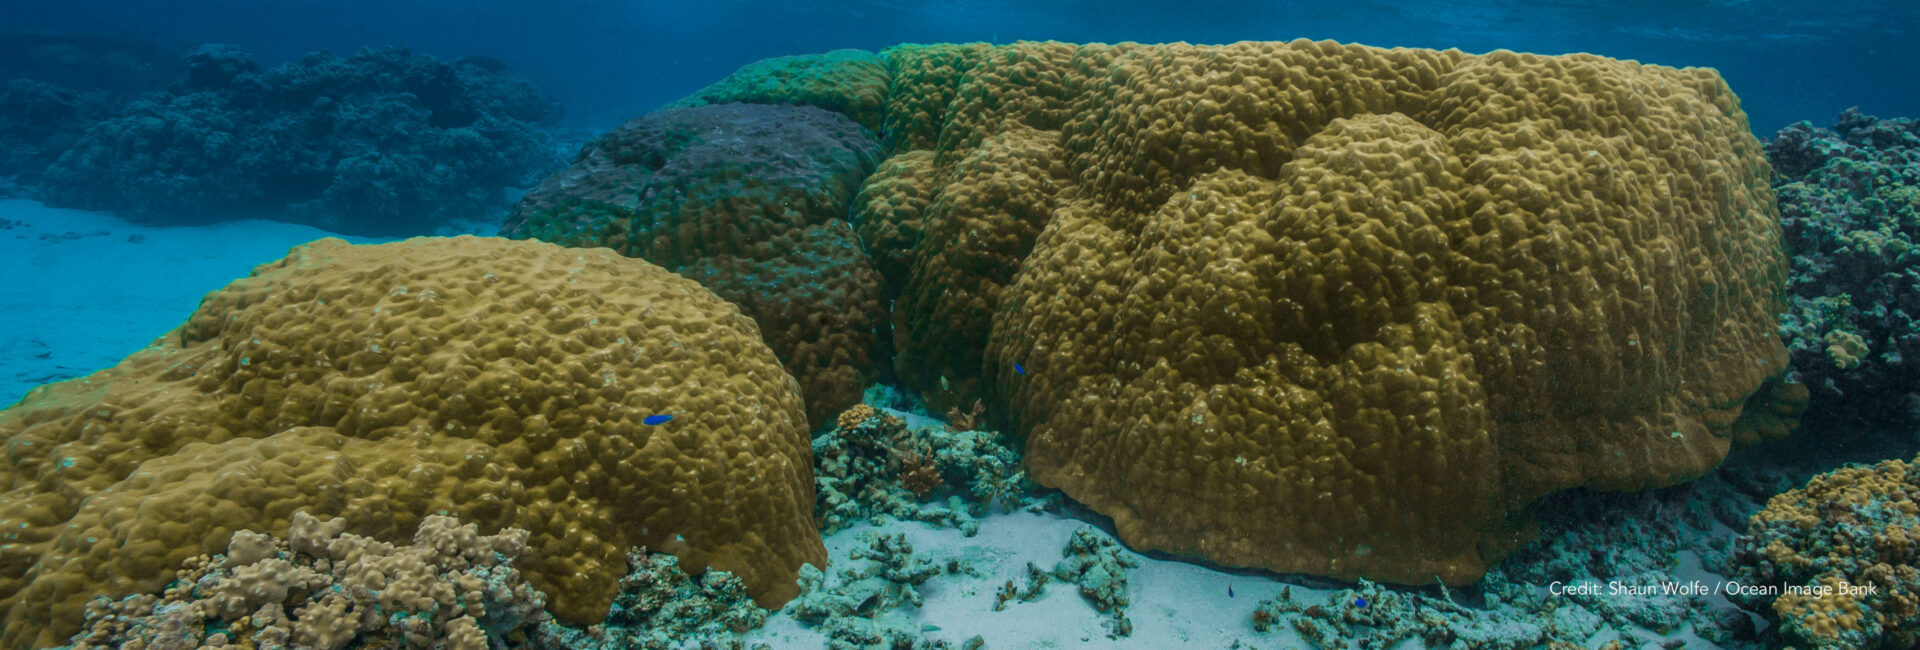 map the giants discover giant corals